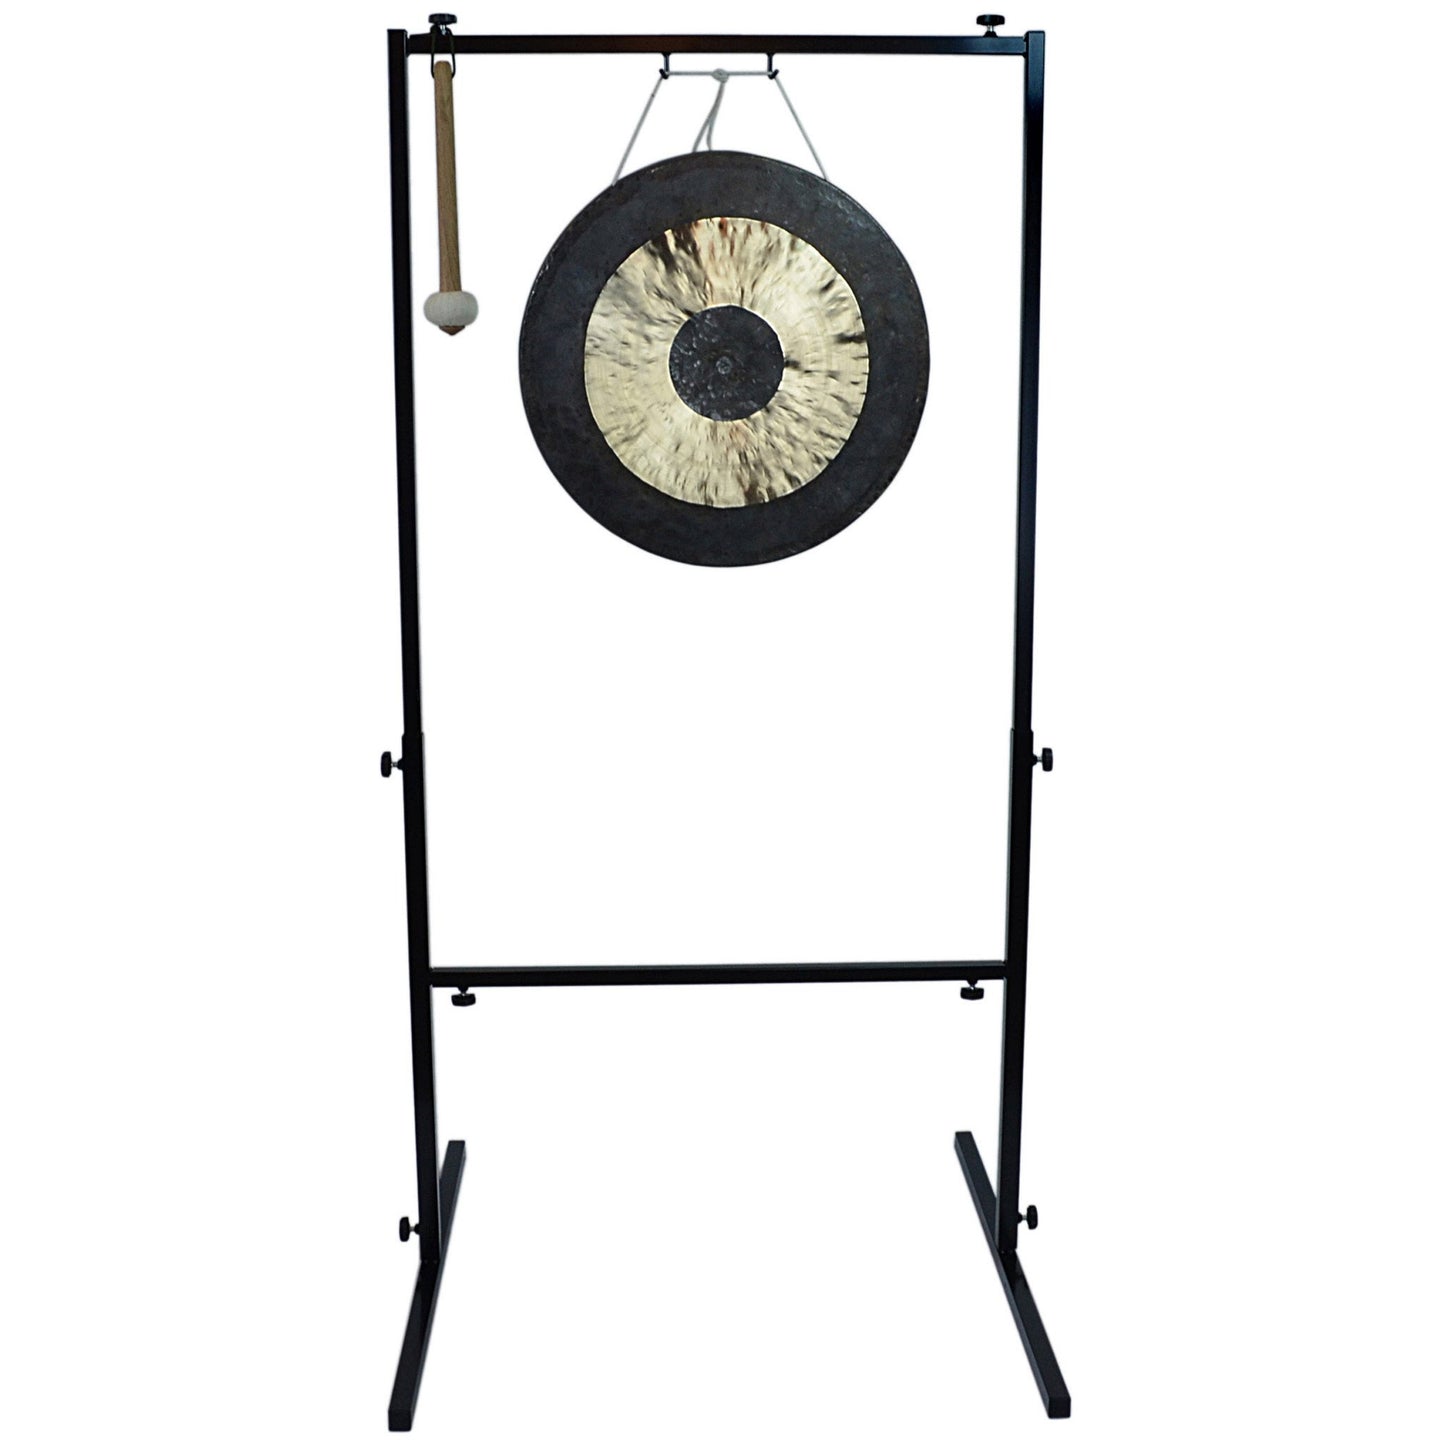 22" Chau Gong on Wuhan Gong Stand with Mallet